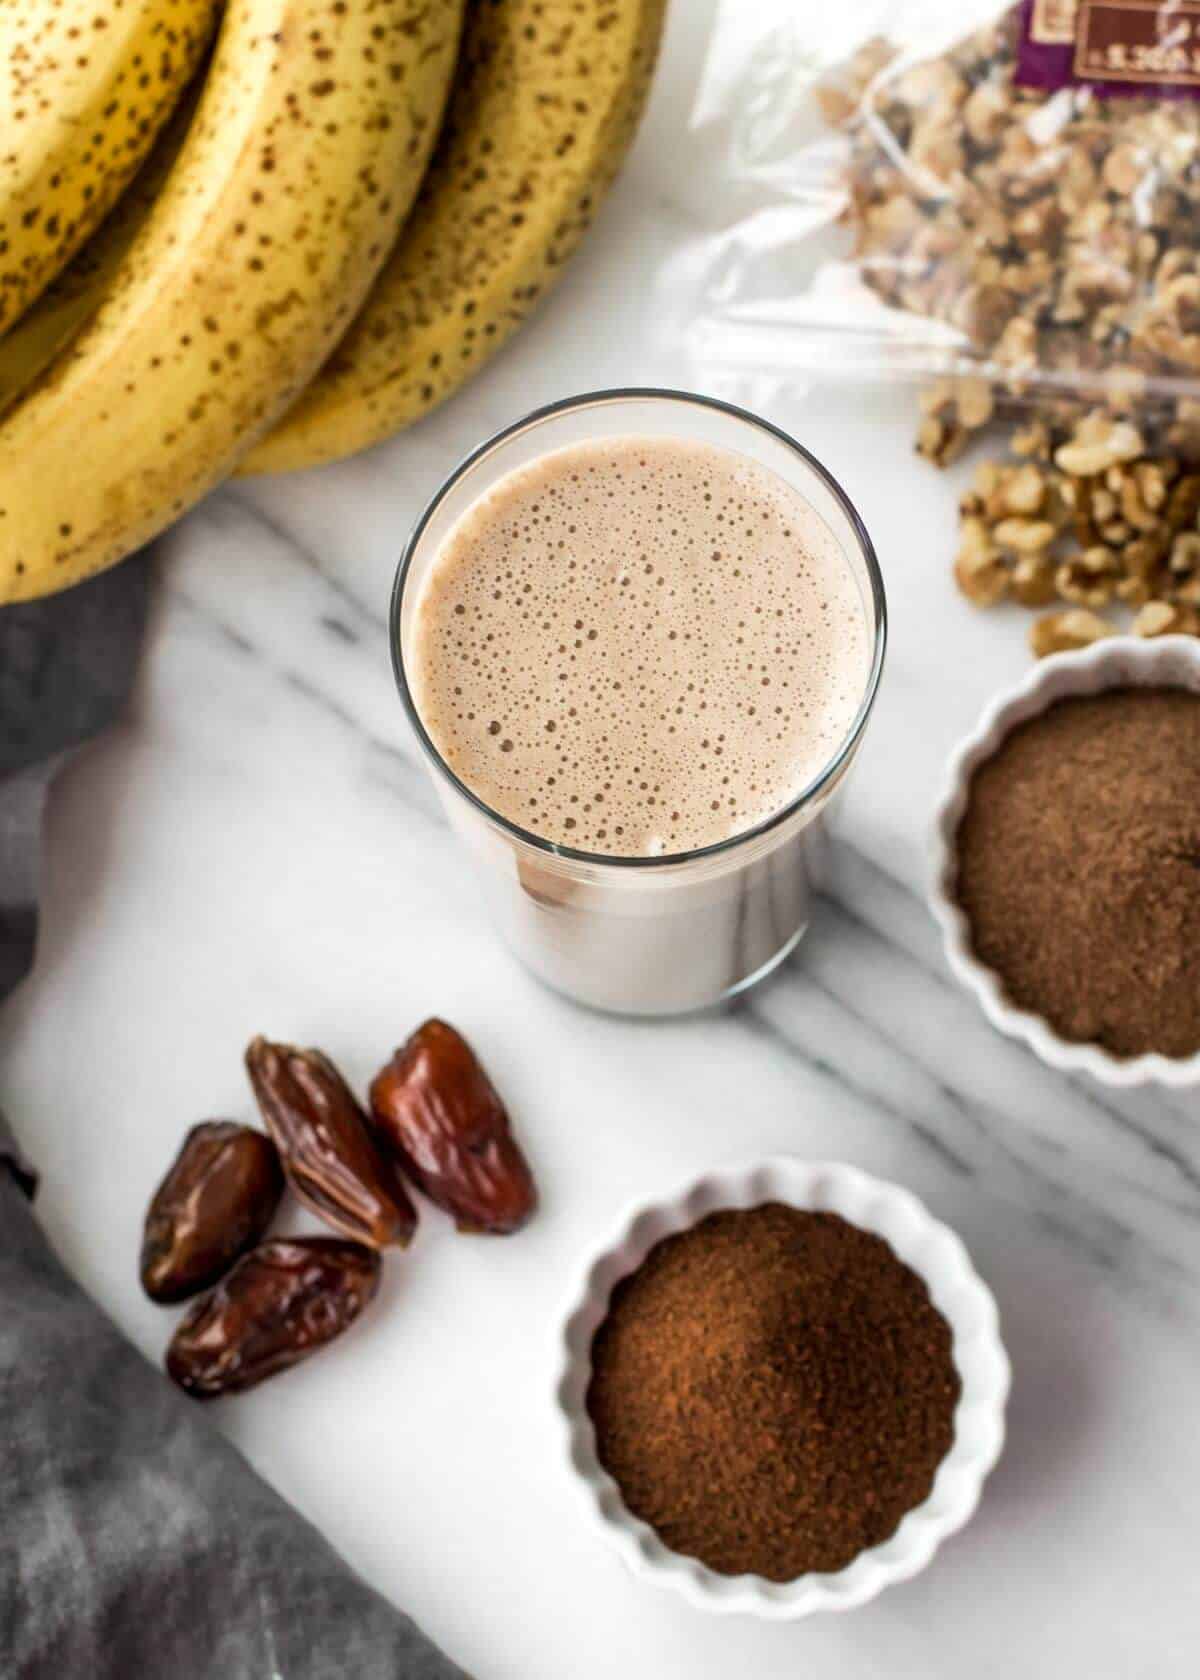 A glass of smoothie with banana. walnuts, coffee powder and dates next to it